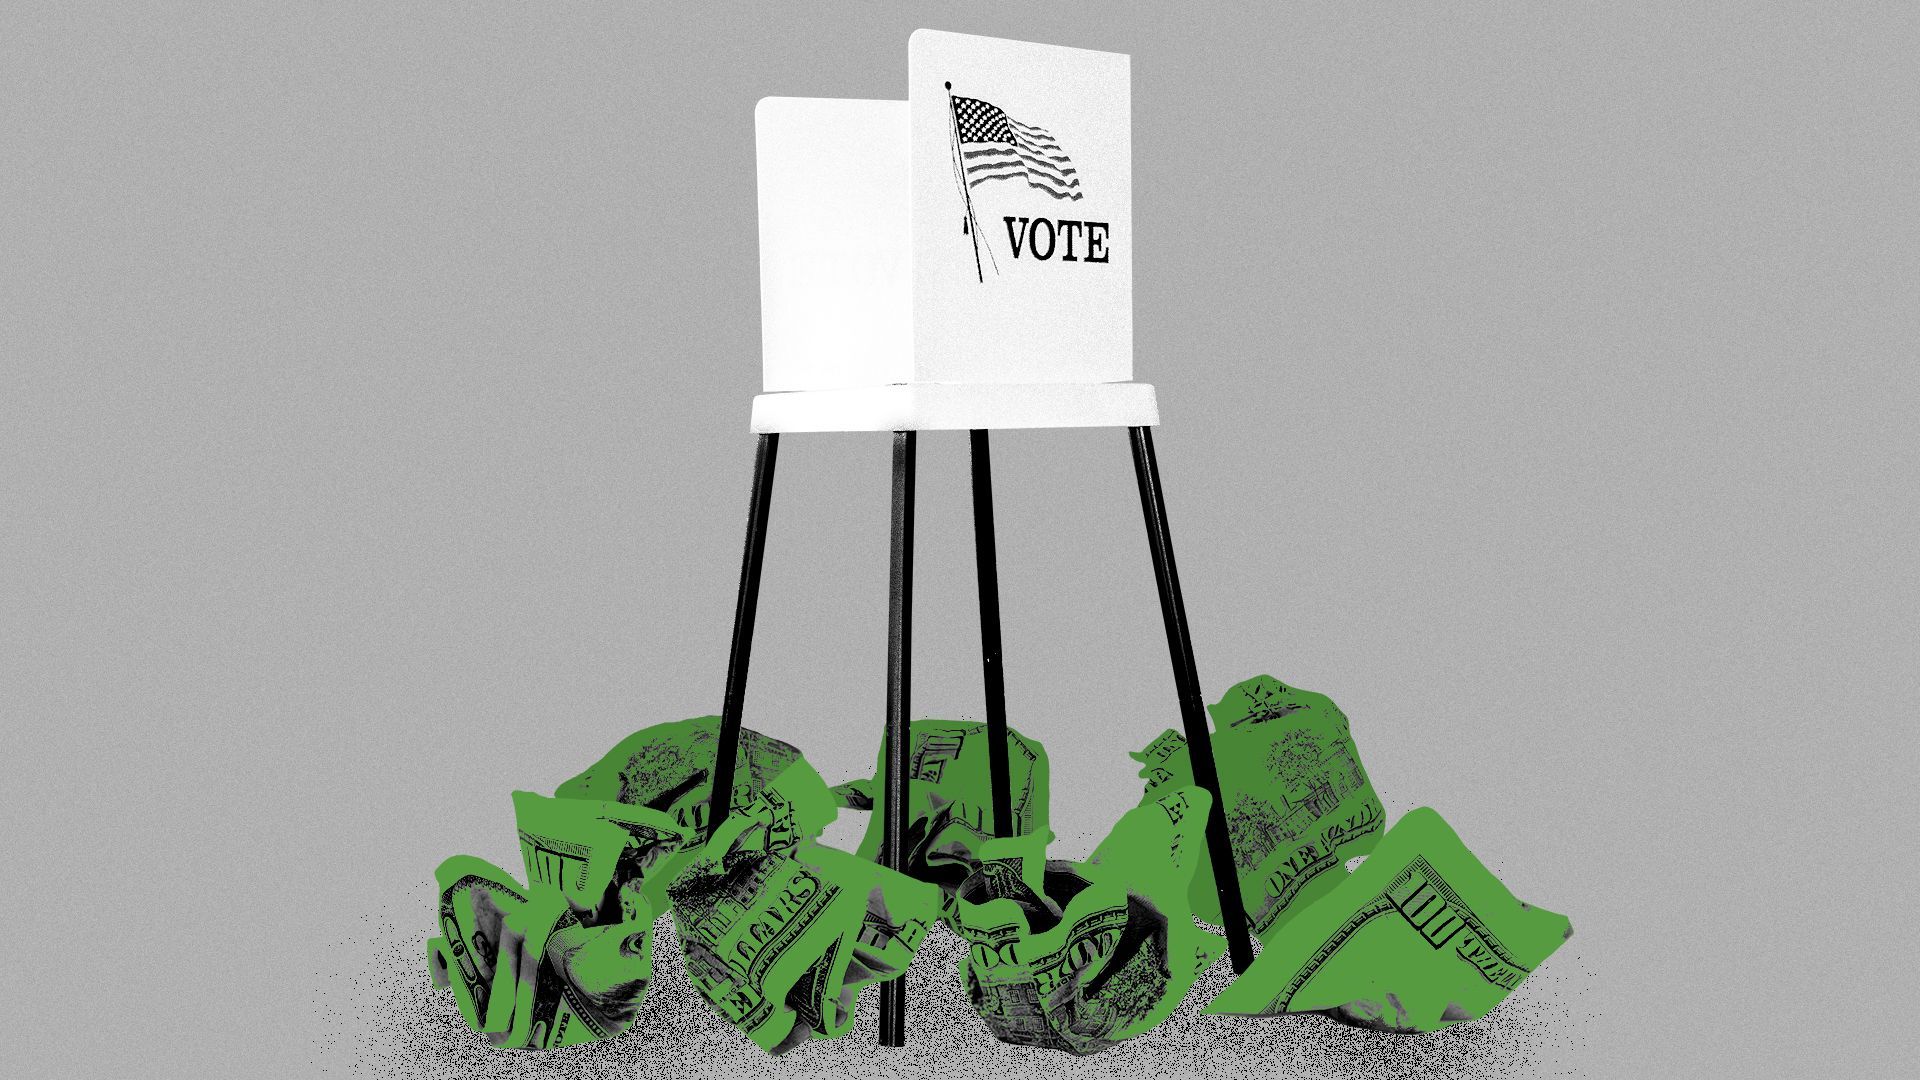 Illustration of a voting booth surrounded by crumpled hundred-dollar bills.